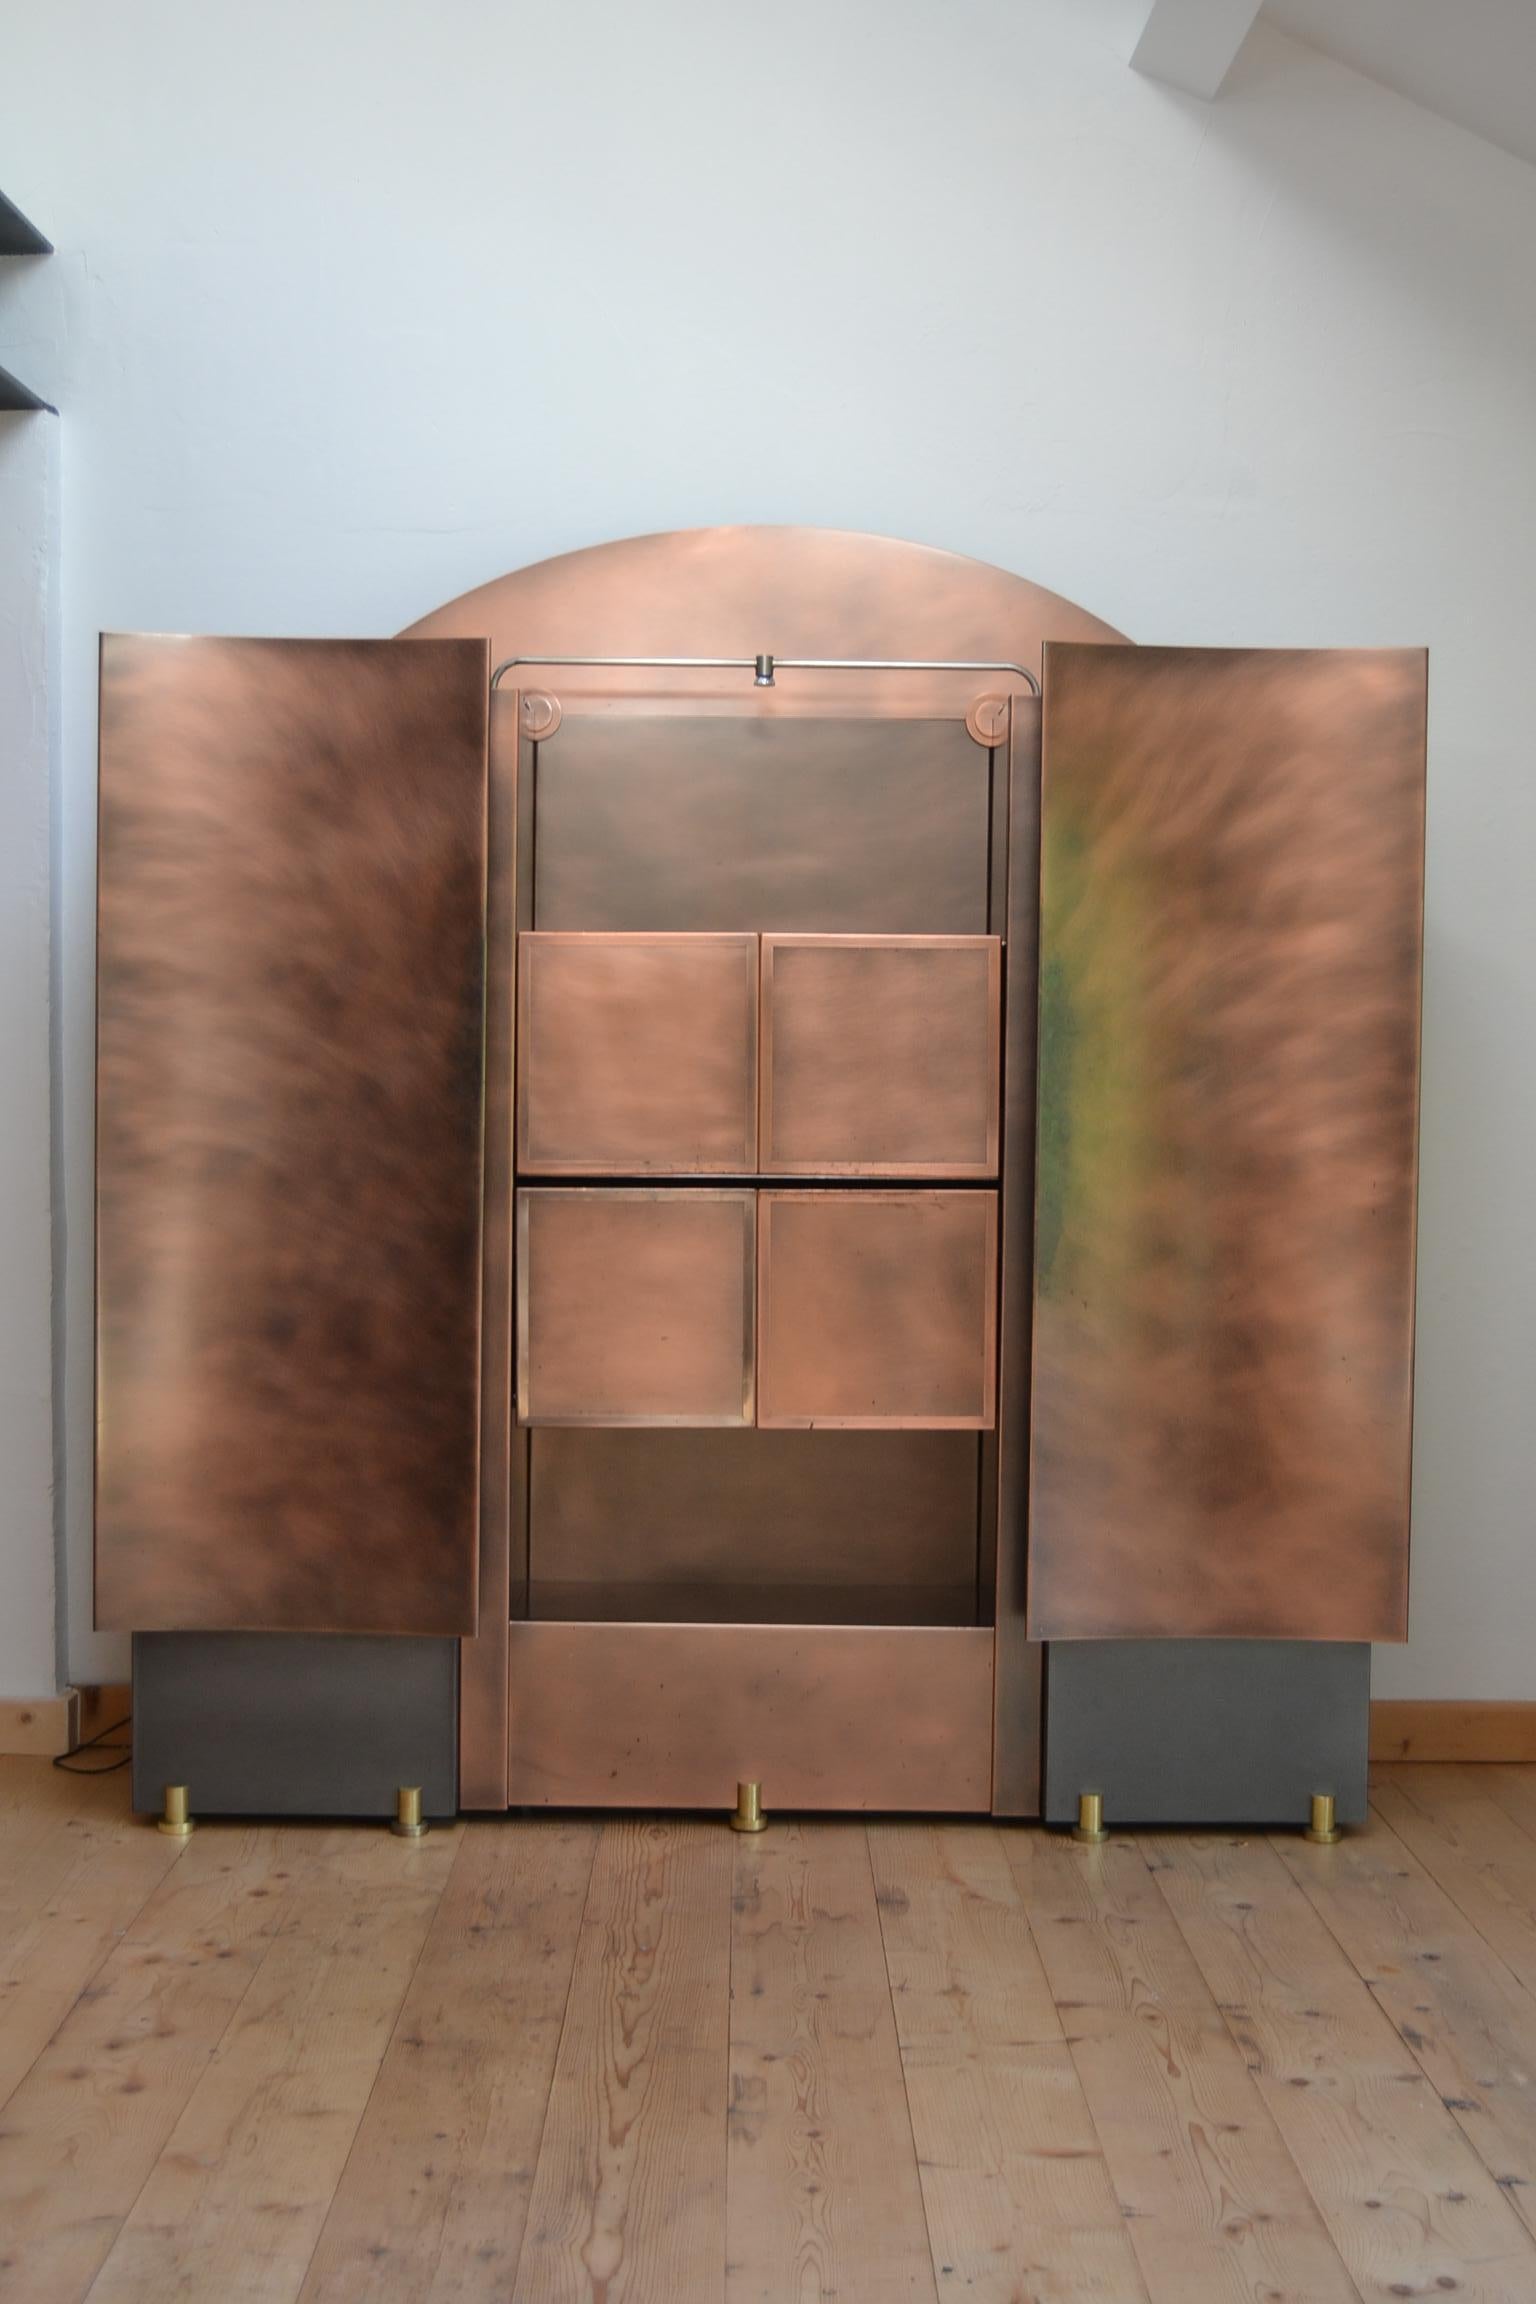 Stunning Belgo Chrom bar cabinet. 
A large vintage design bar cabinet covered with red copper on metal base and brass feet. 
This stylish cabinet was made by the Belgium Company Belgo Chrom - Belgochrom. 

It's a luxurious high quality cabinet in